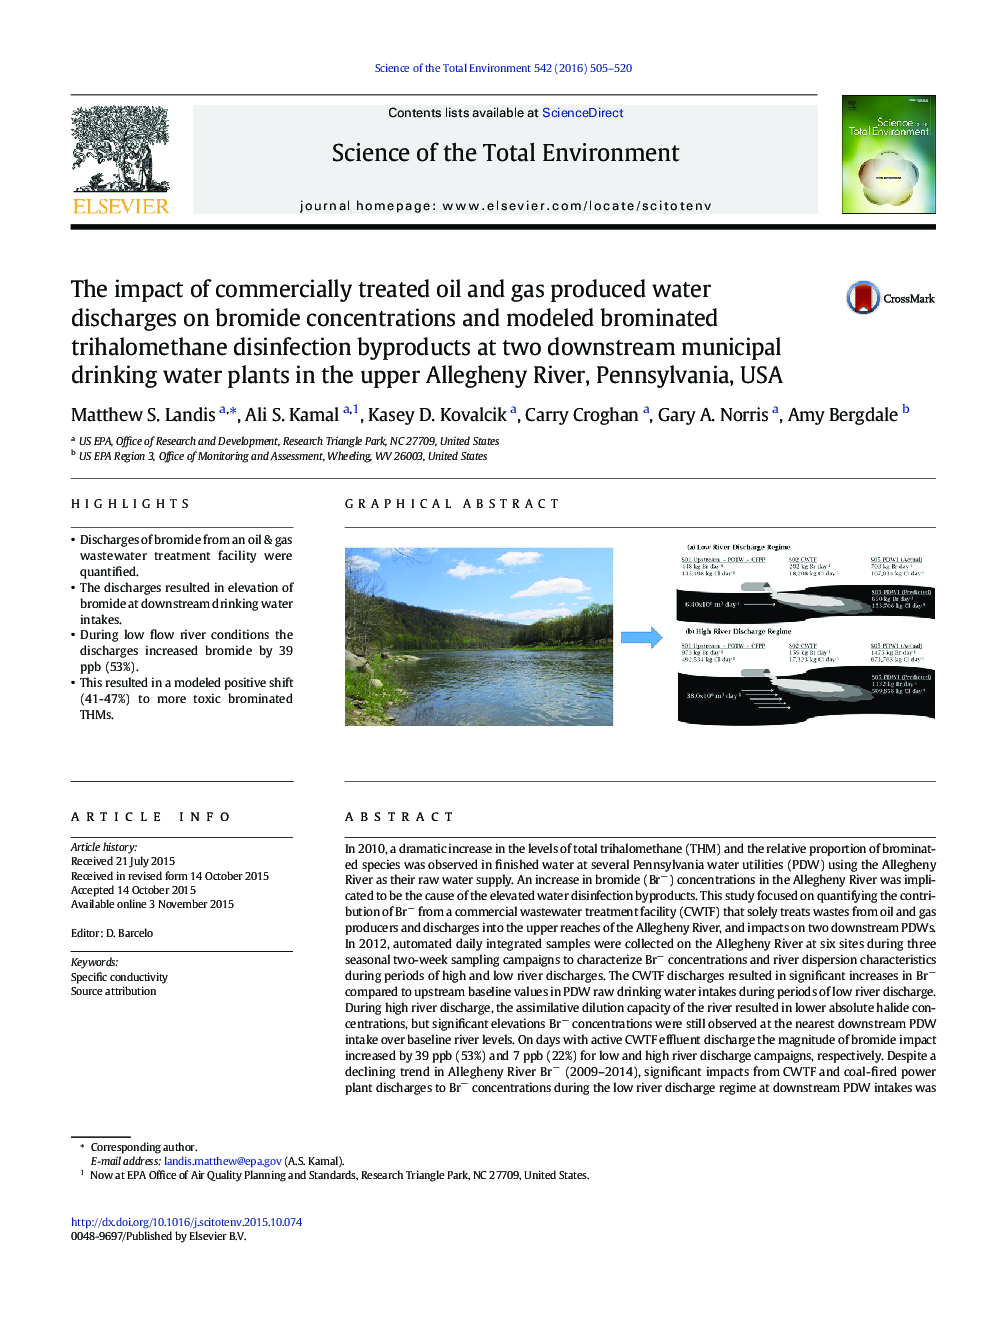 The impact of commercially treated oil and gas produced water discharges on bromide concentrations and modeled brominated trihalomethane disinfection byproducts at two downstream municipal drinking water plants in the upper Allegheny River, Pennsylvania, 